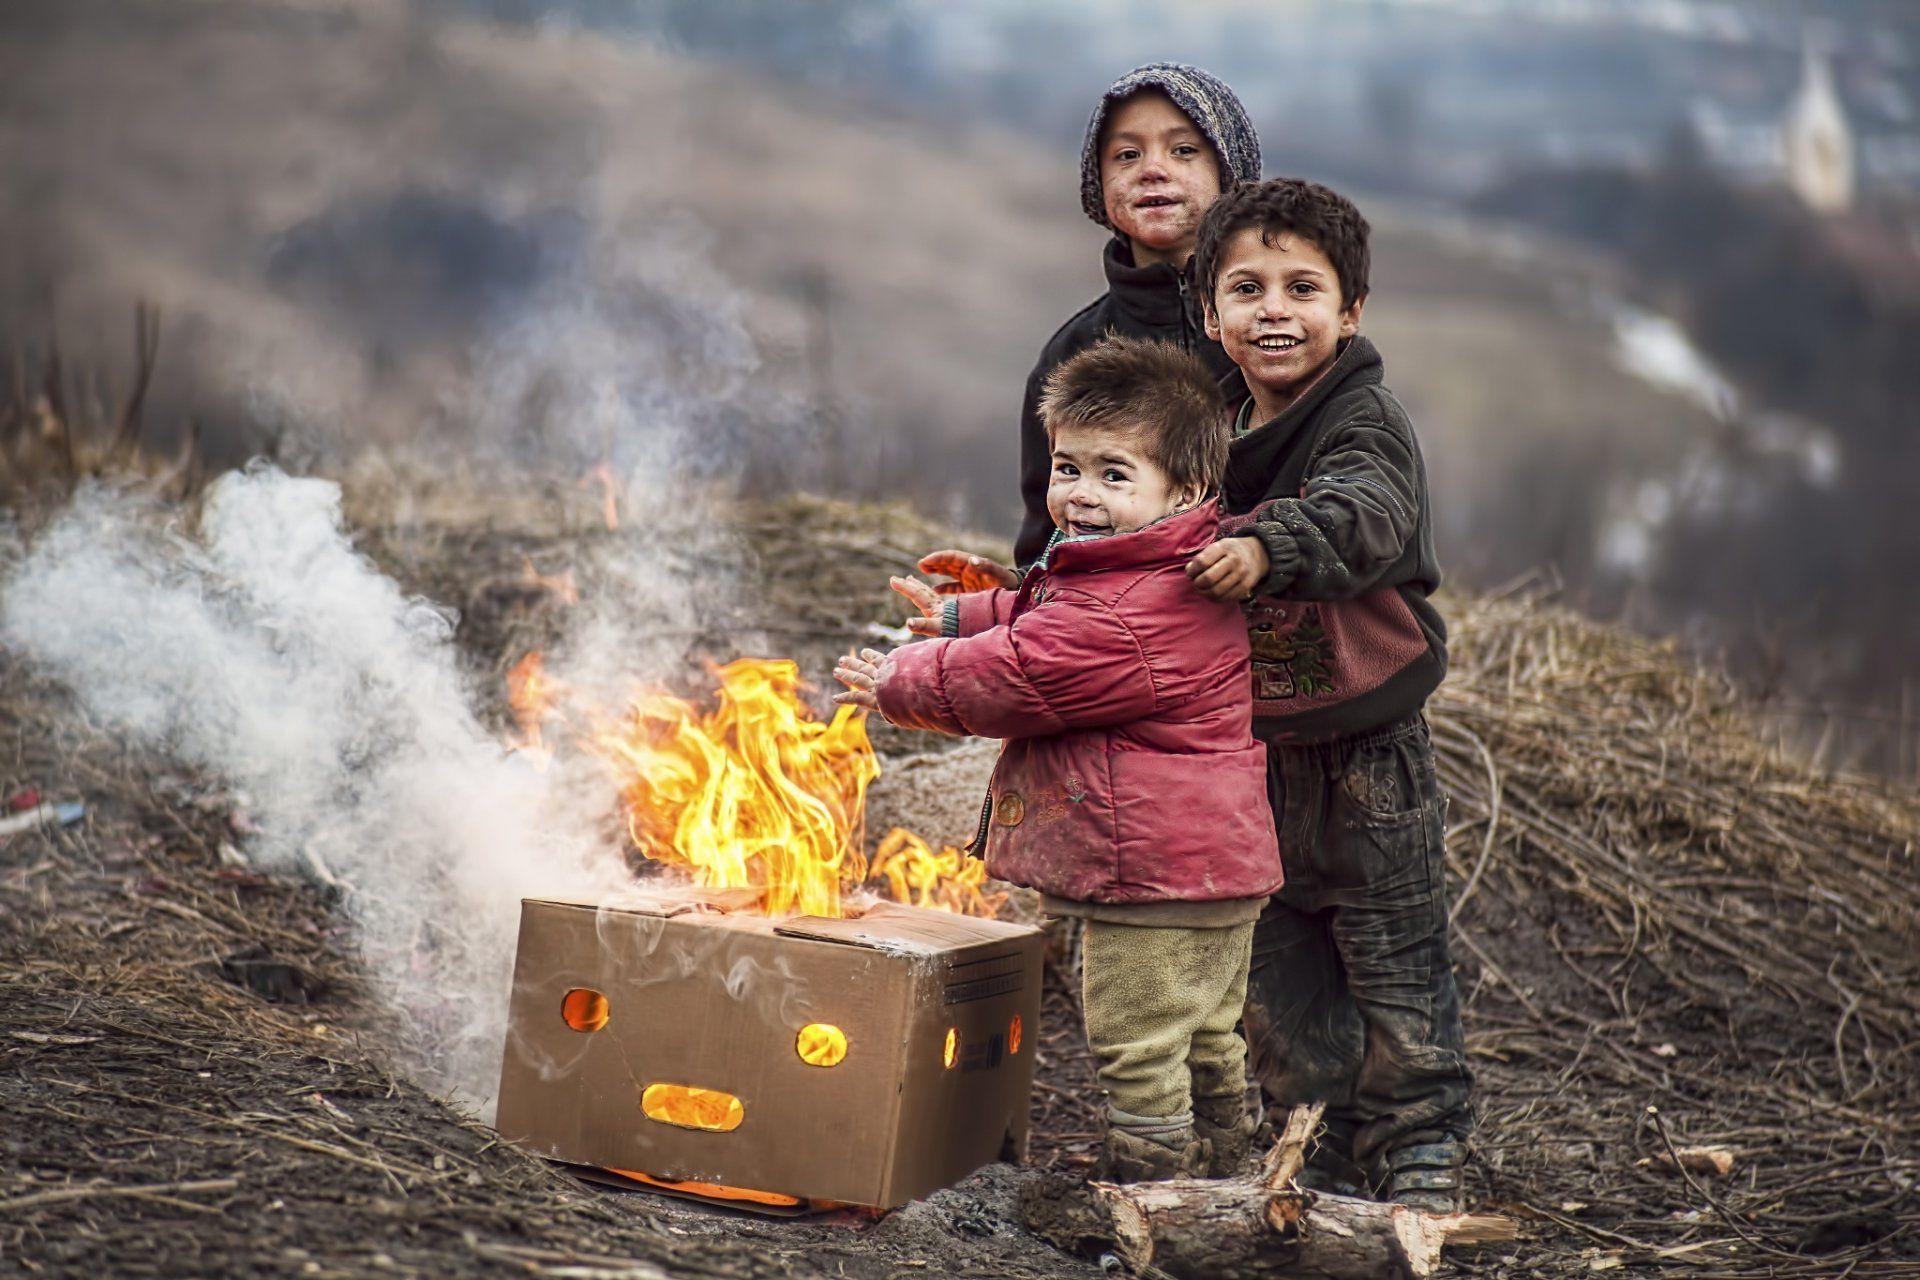 children fire poverty boys grubby smile happiness heat are heated